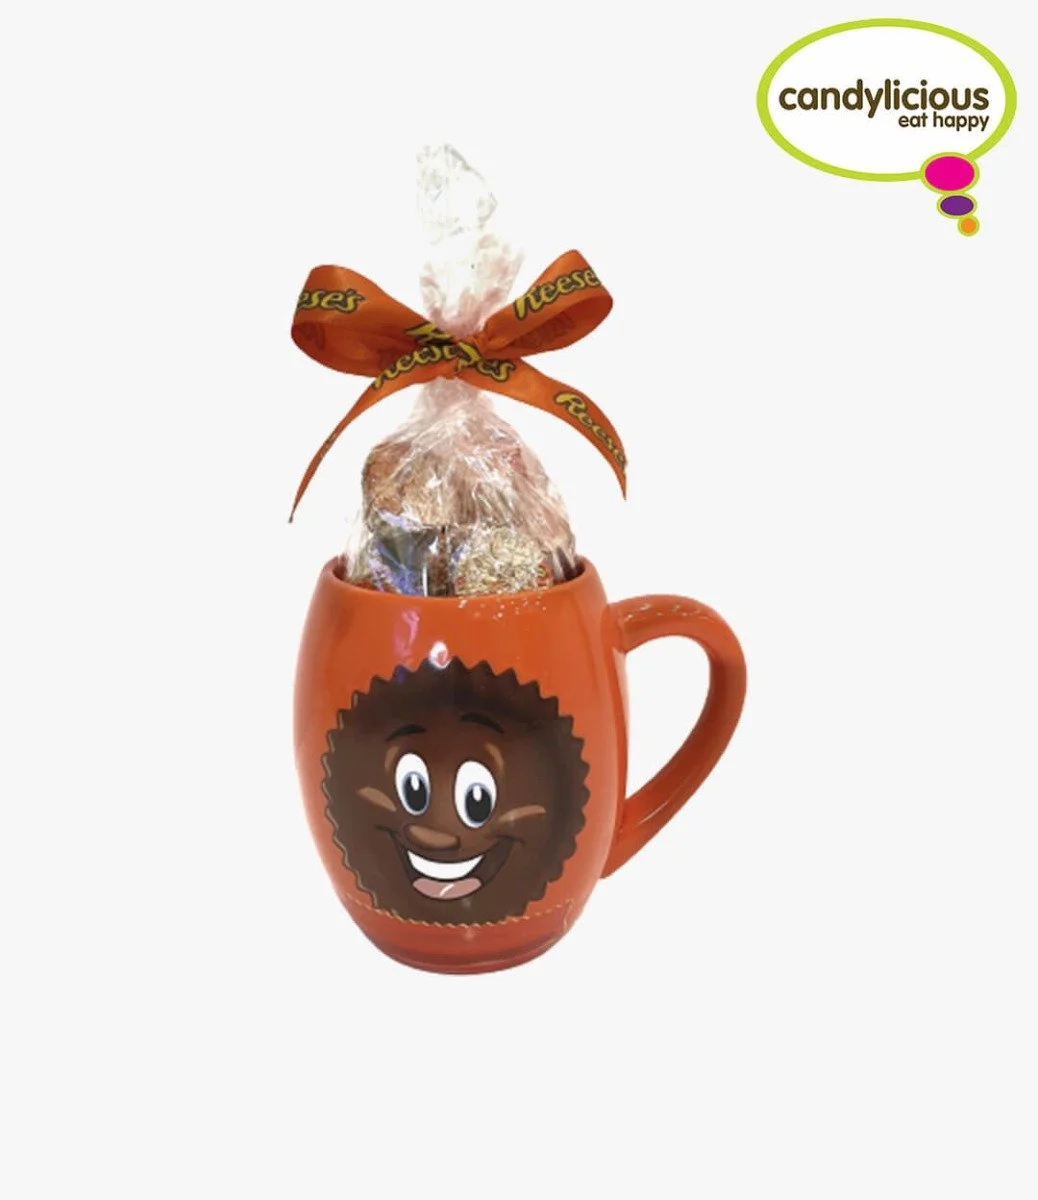 Reese's Peanut Butter Cups Character Mug By Hershey's